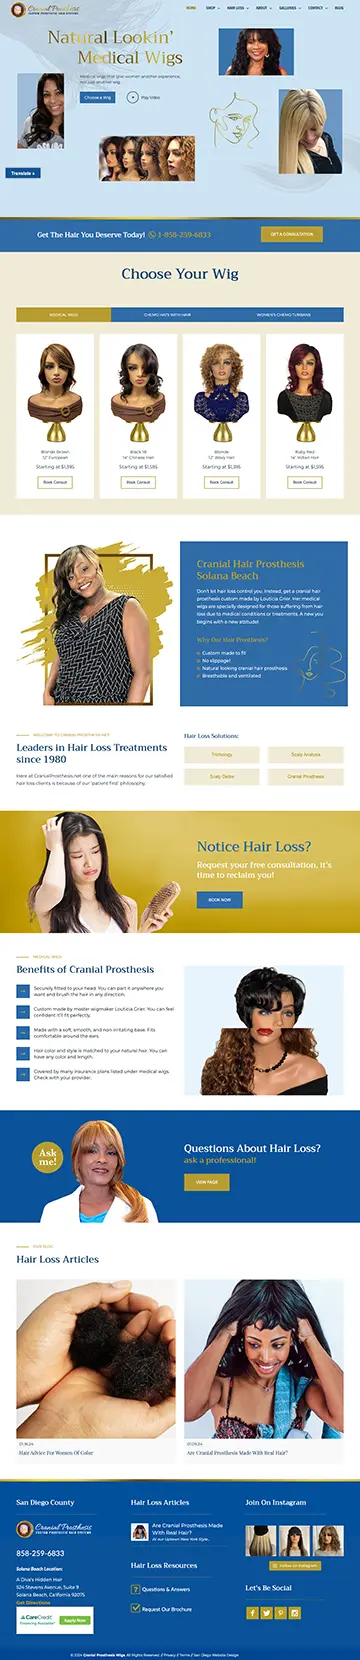 Website Design for Cranial Prosthesis Wigs by Envisager Studio